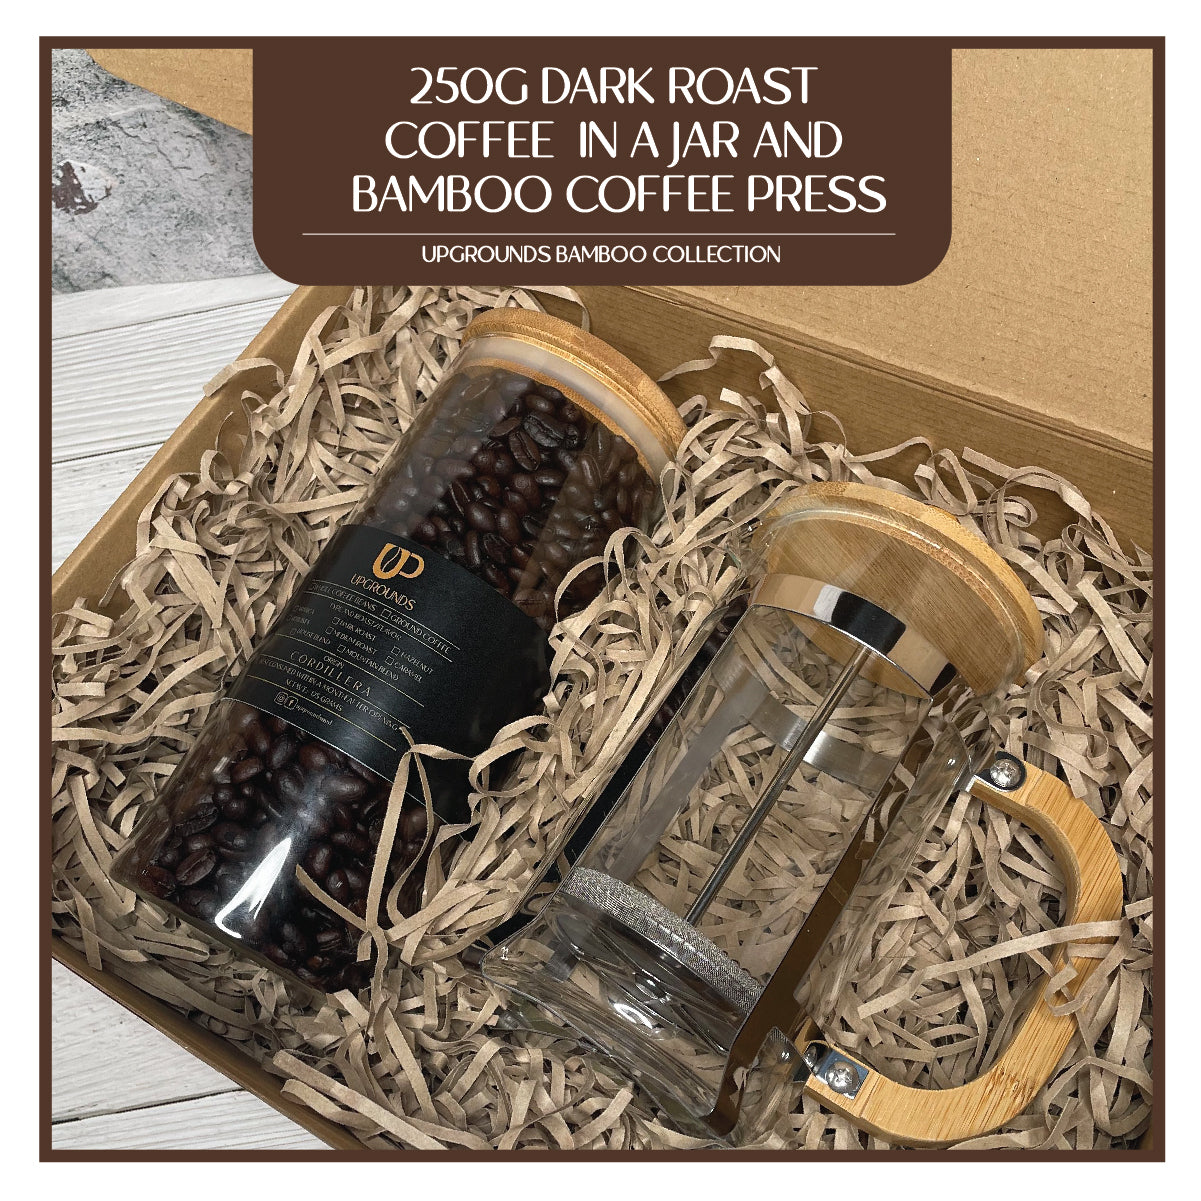 250g Dark Roast Coffee in Big Jar and Bamboo French Press | Upgrounds